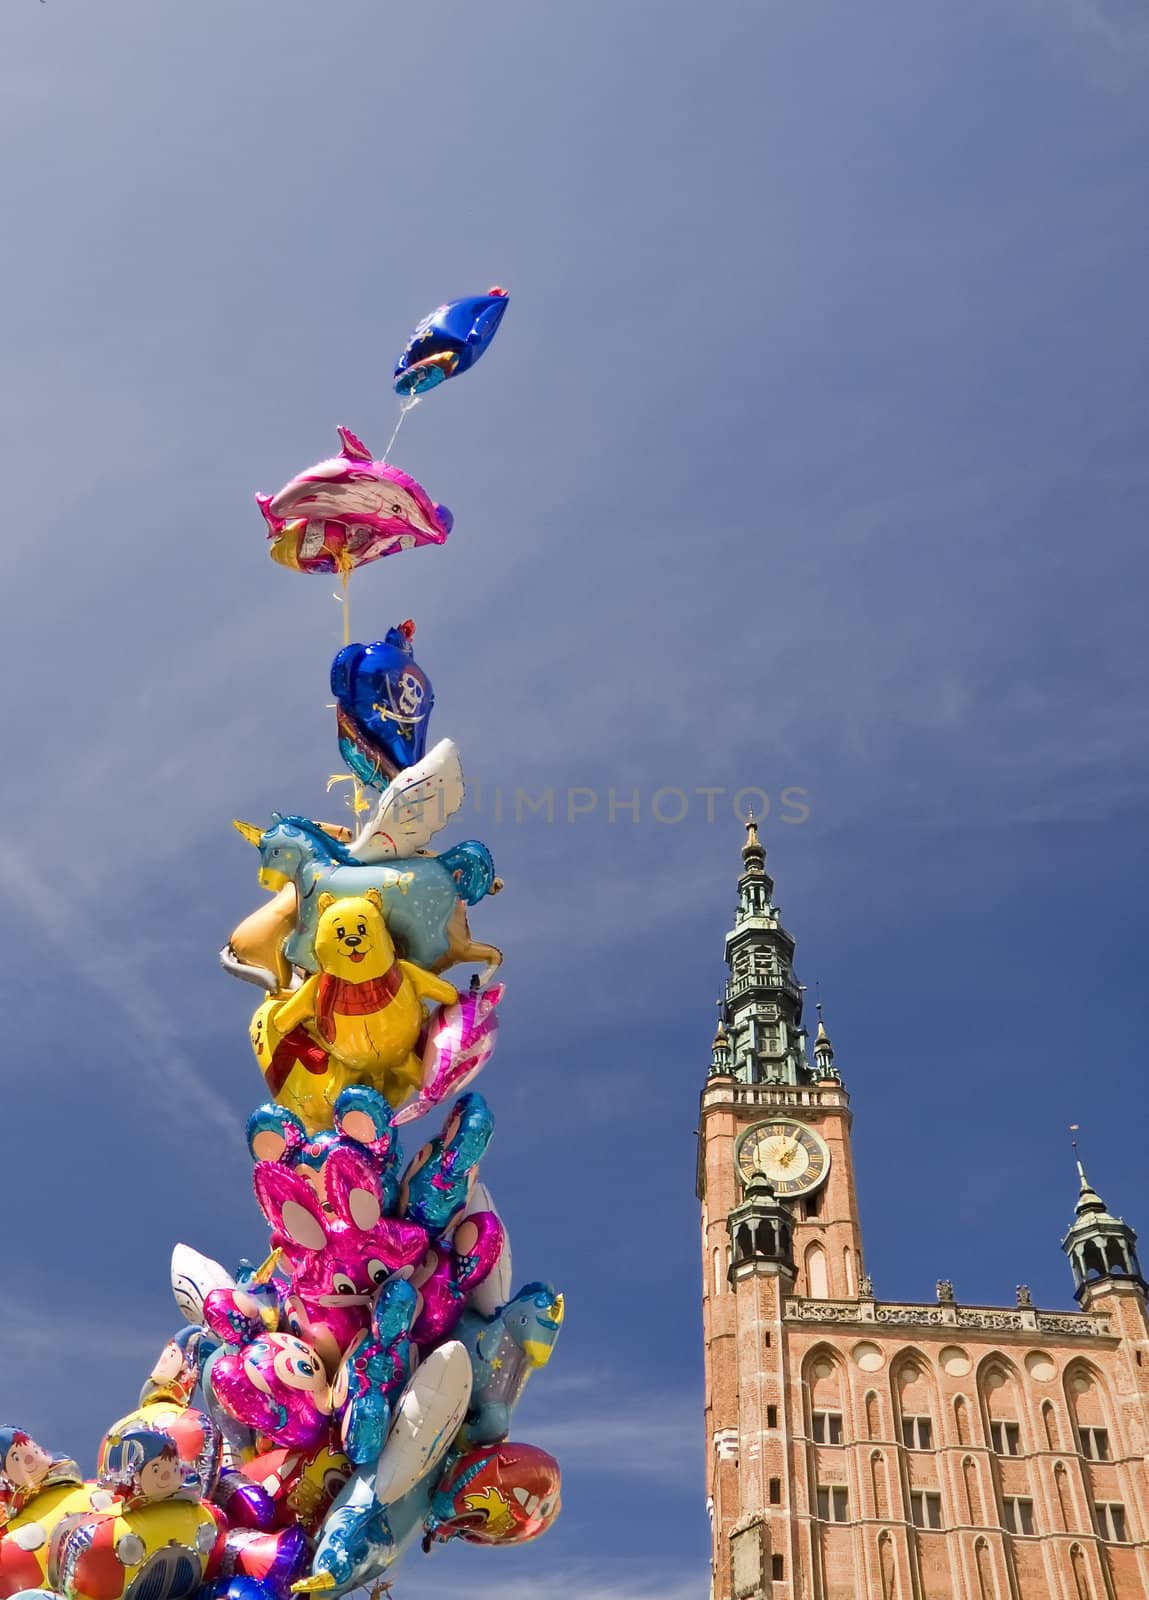 Gdansk, a city on the Euro 2012 by whiteowl